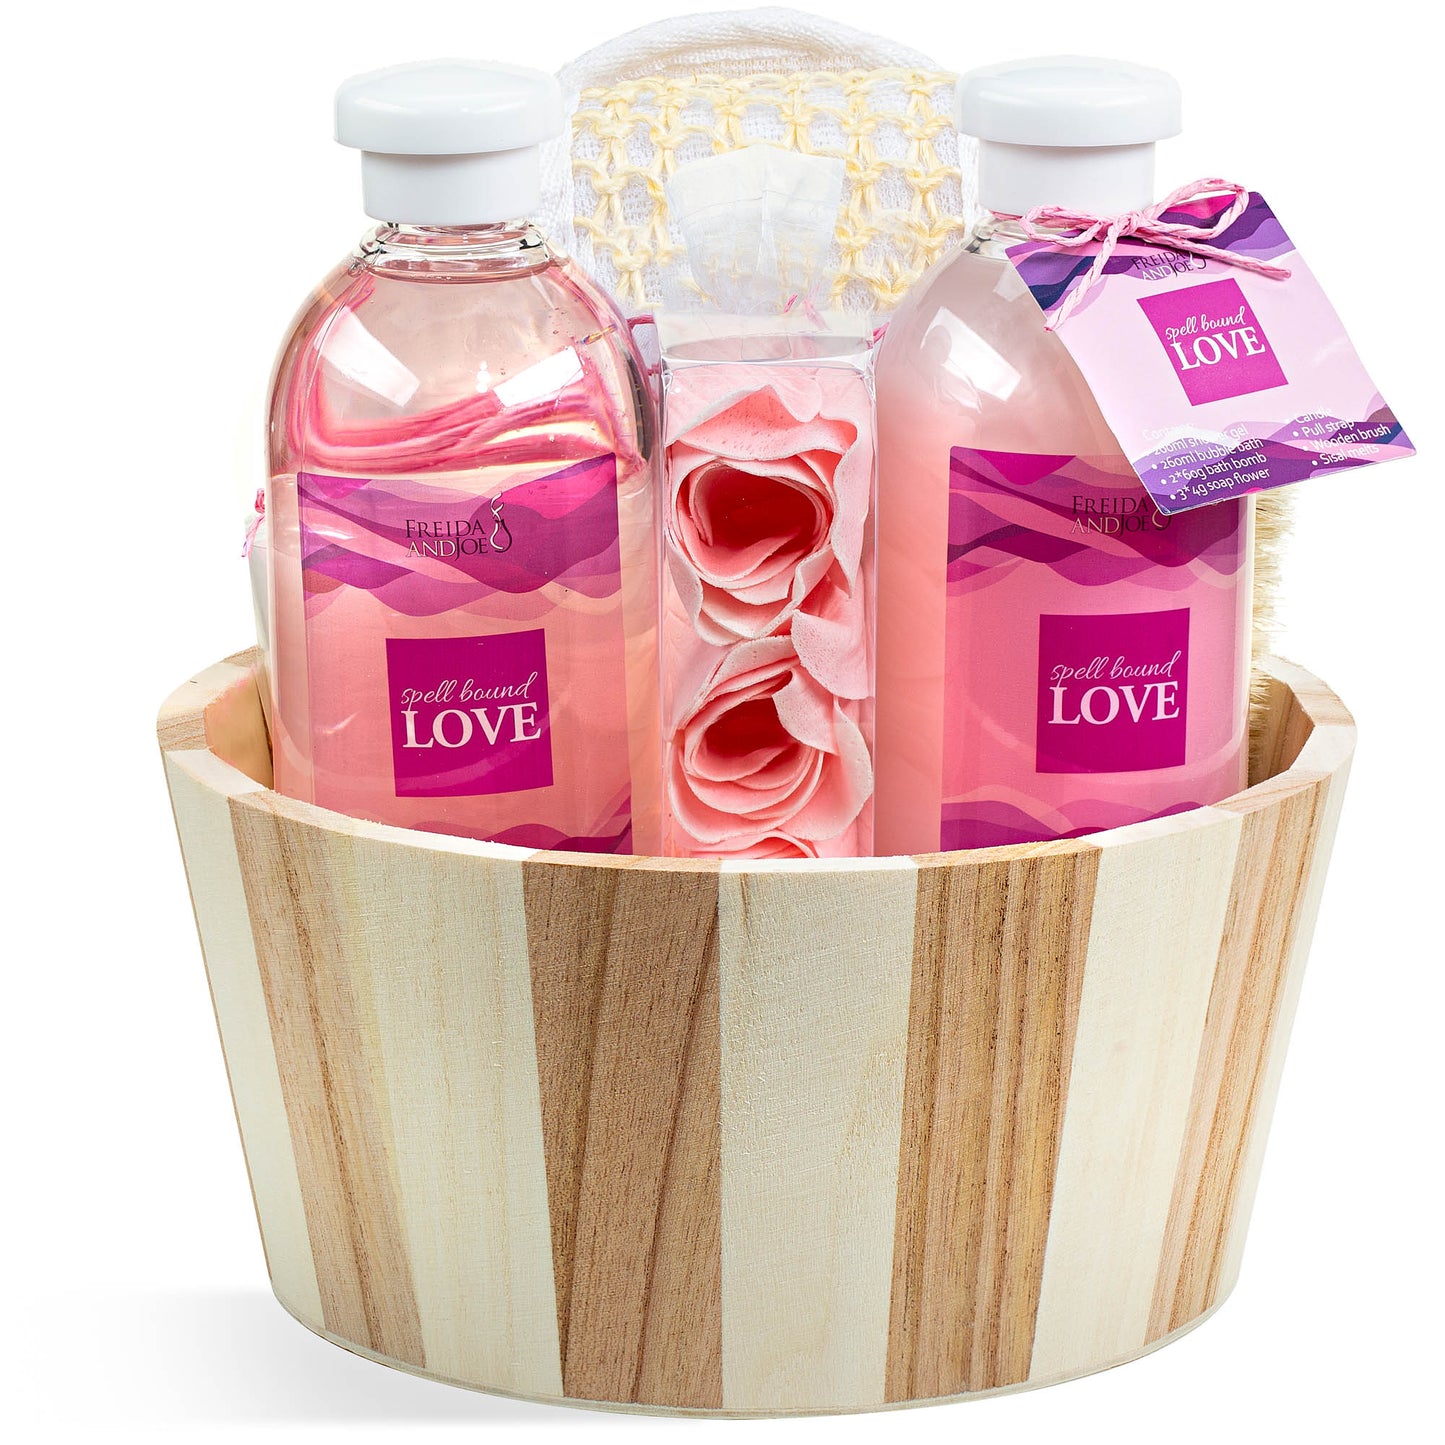 Spa Gift Basket: Perfect for Her | Perfect Gift for Any Occasion | Includes An Assortment of Essential Spa Treatments & Relaxation Set | Perfect Way To Show Someone You Care